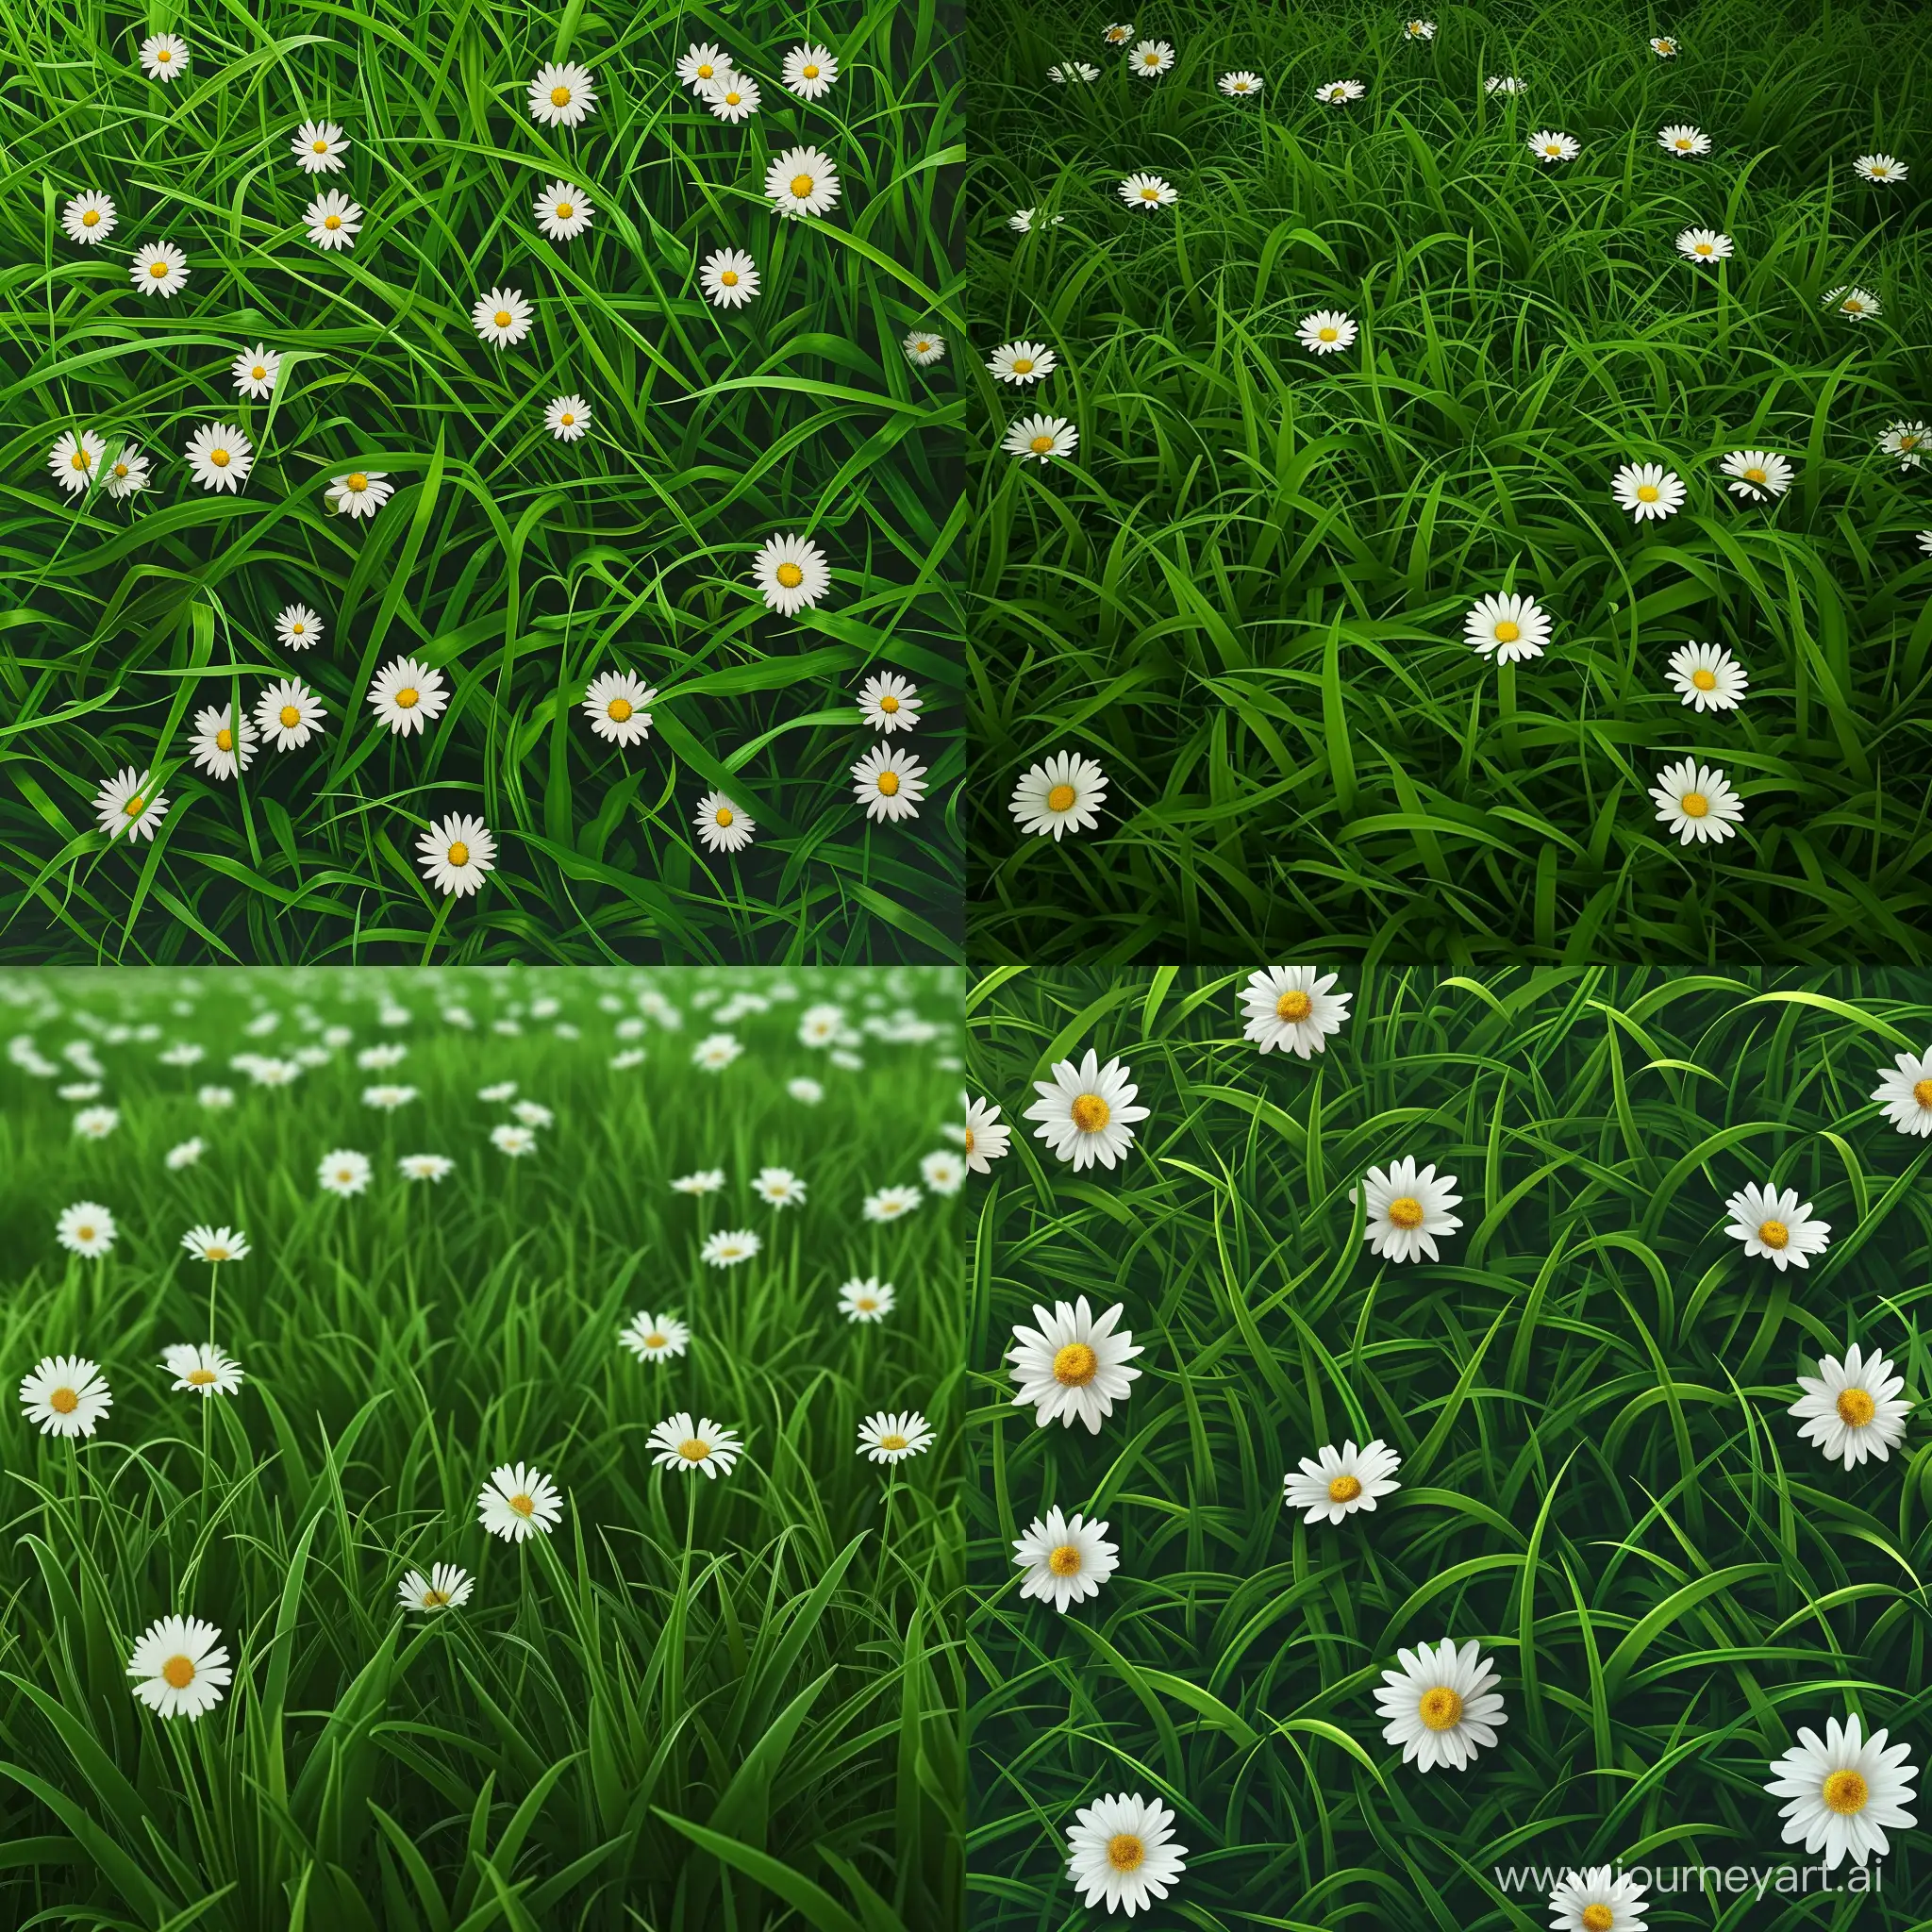 a realistic image of a field of green grass with white daisies scattered throughout the field